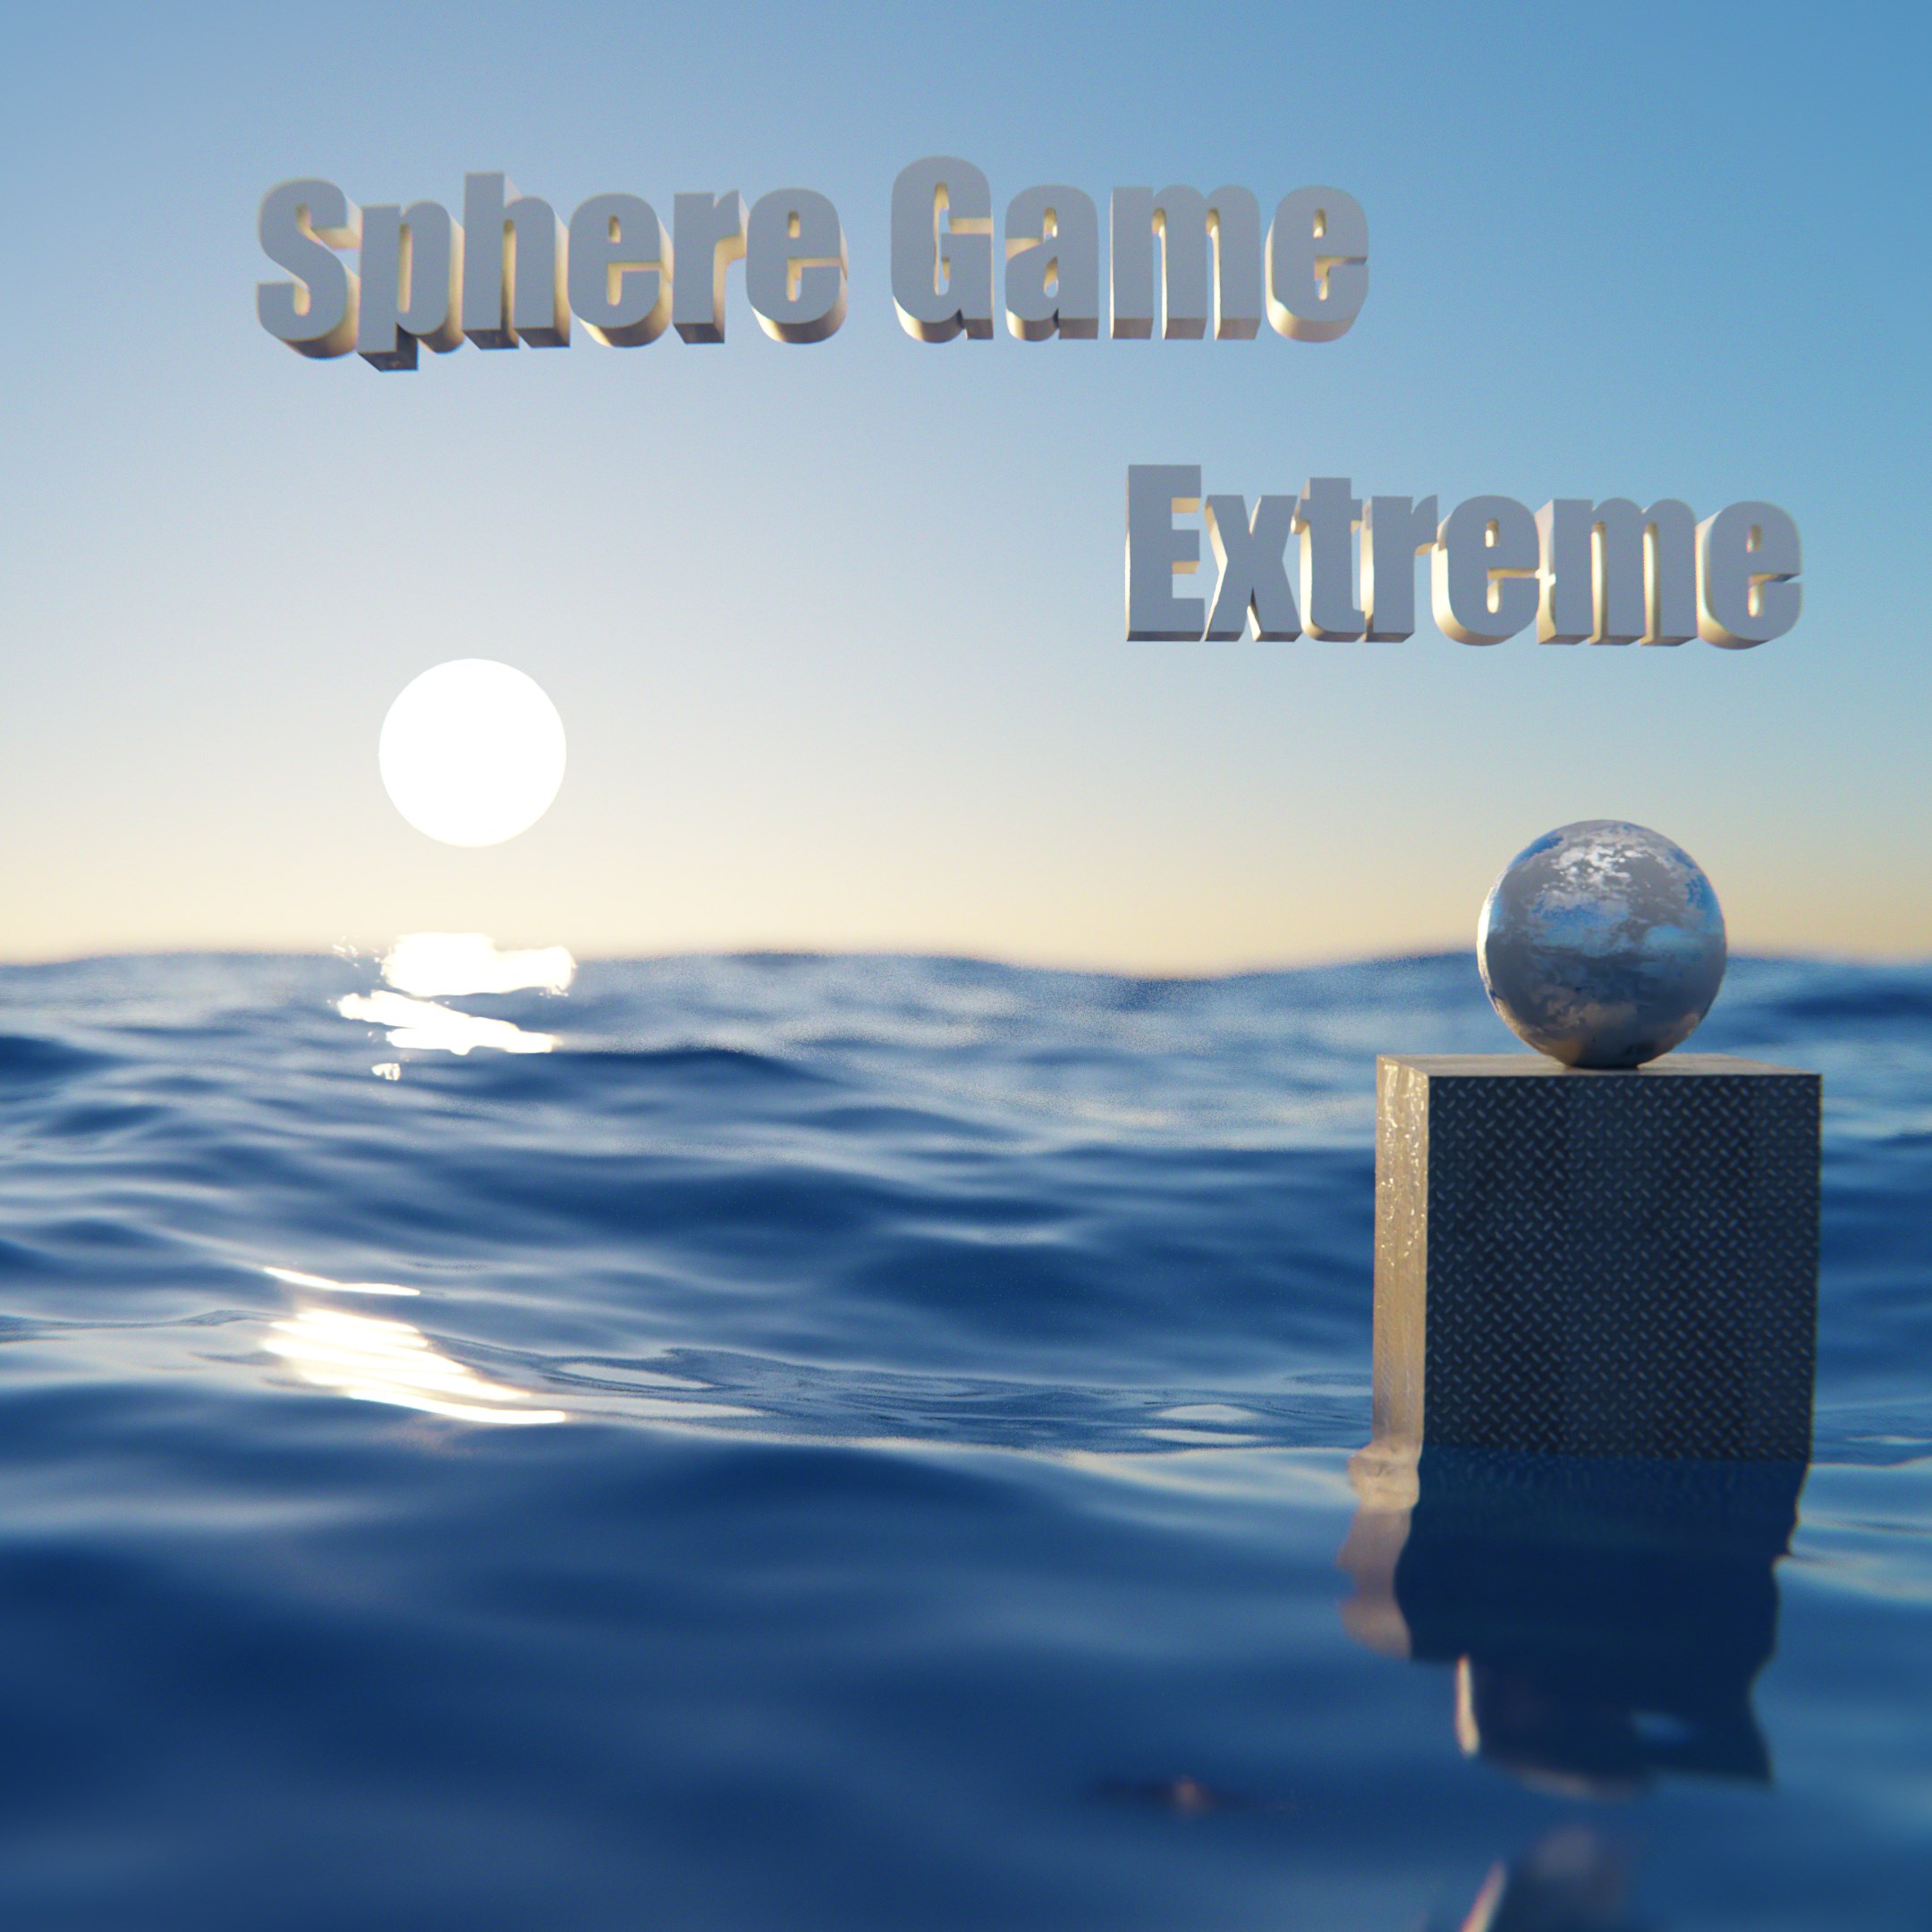 Sphere Game Extreme technical specifications for laptop